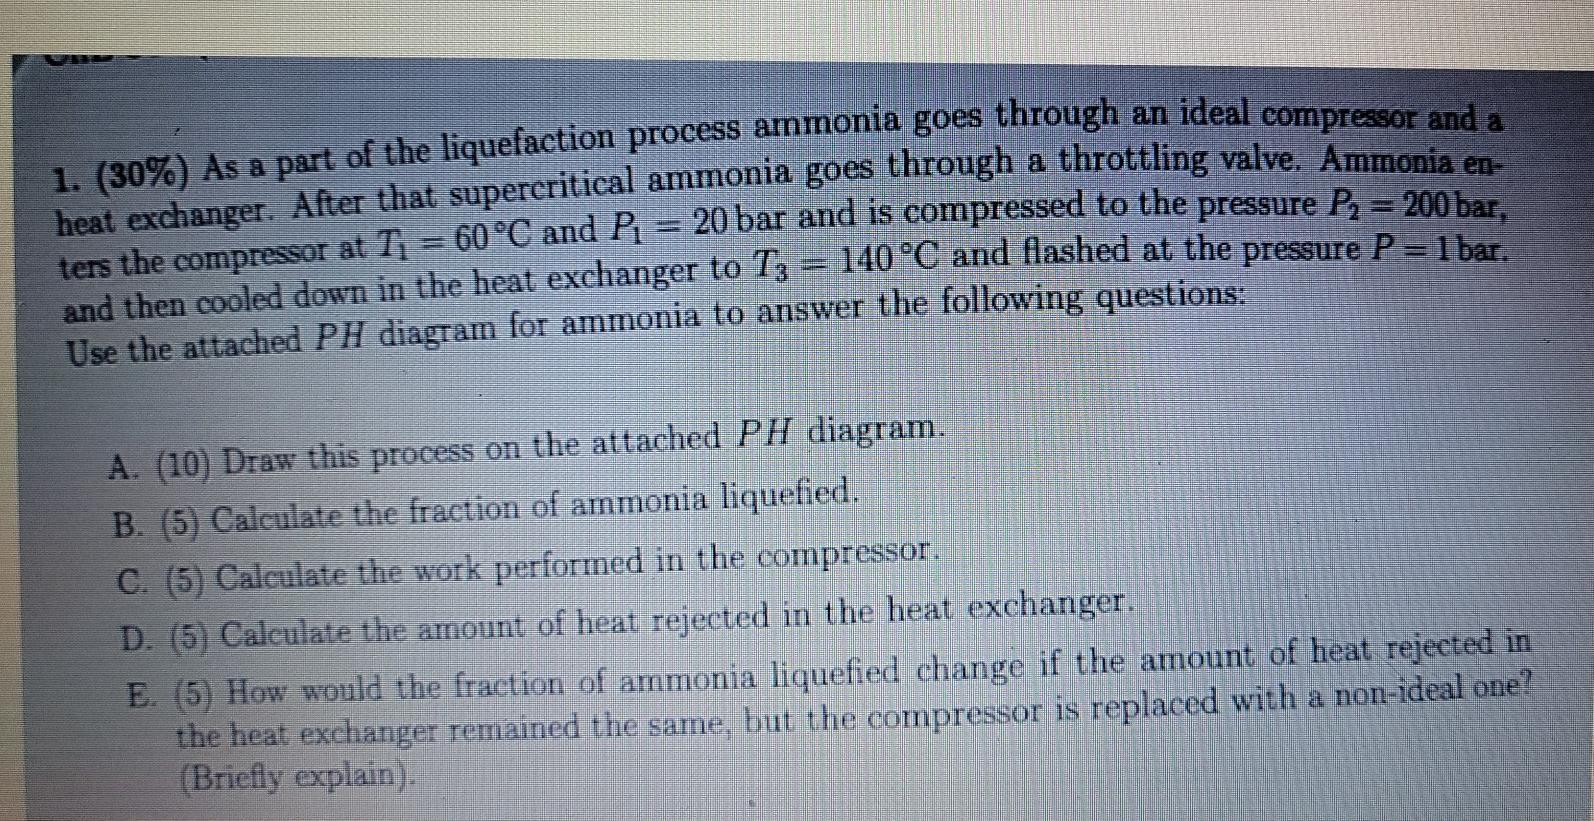 1. (30%) As a part of the liquefaction process ammonia goes through an ideal compressor and a heat exchanger. After that supe